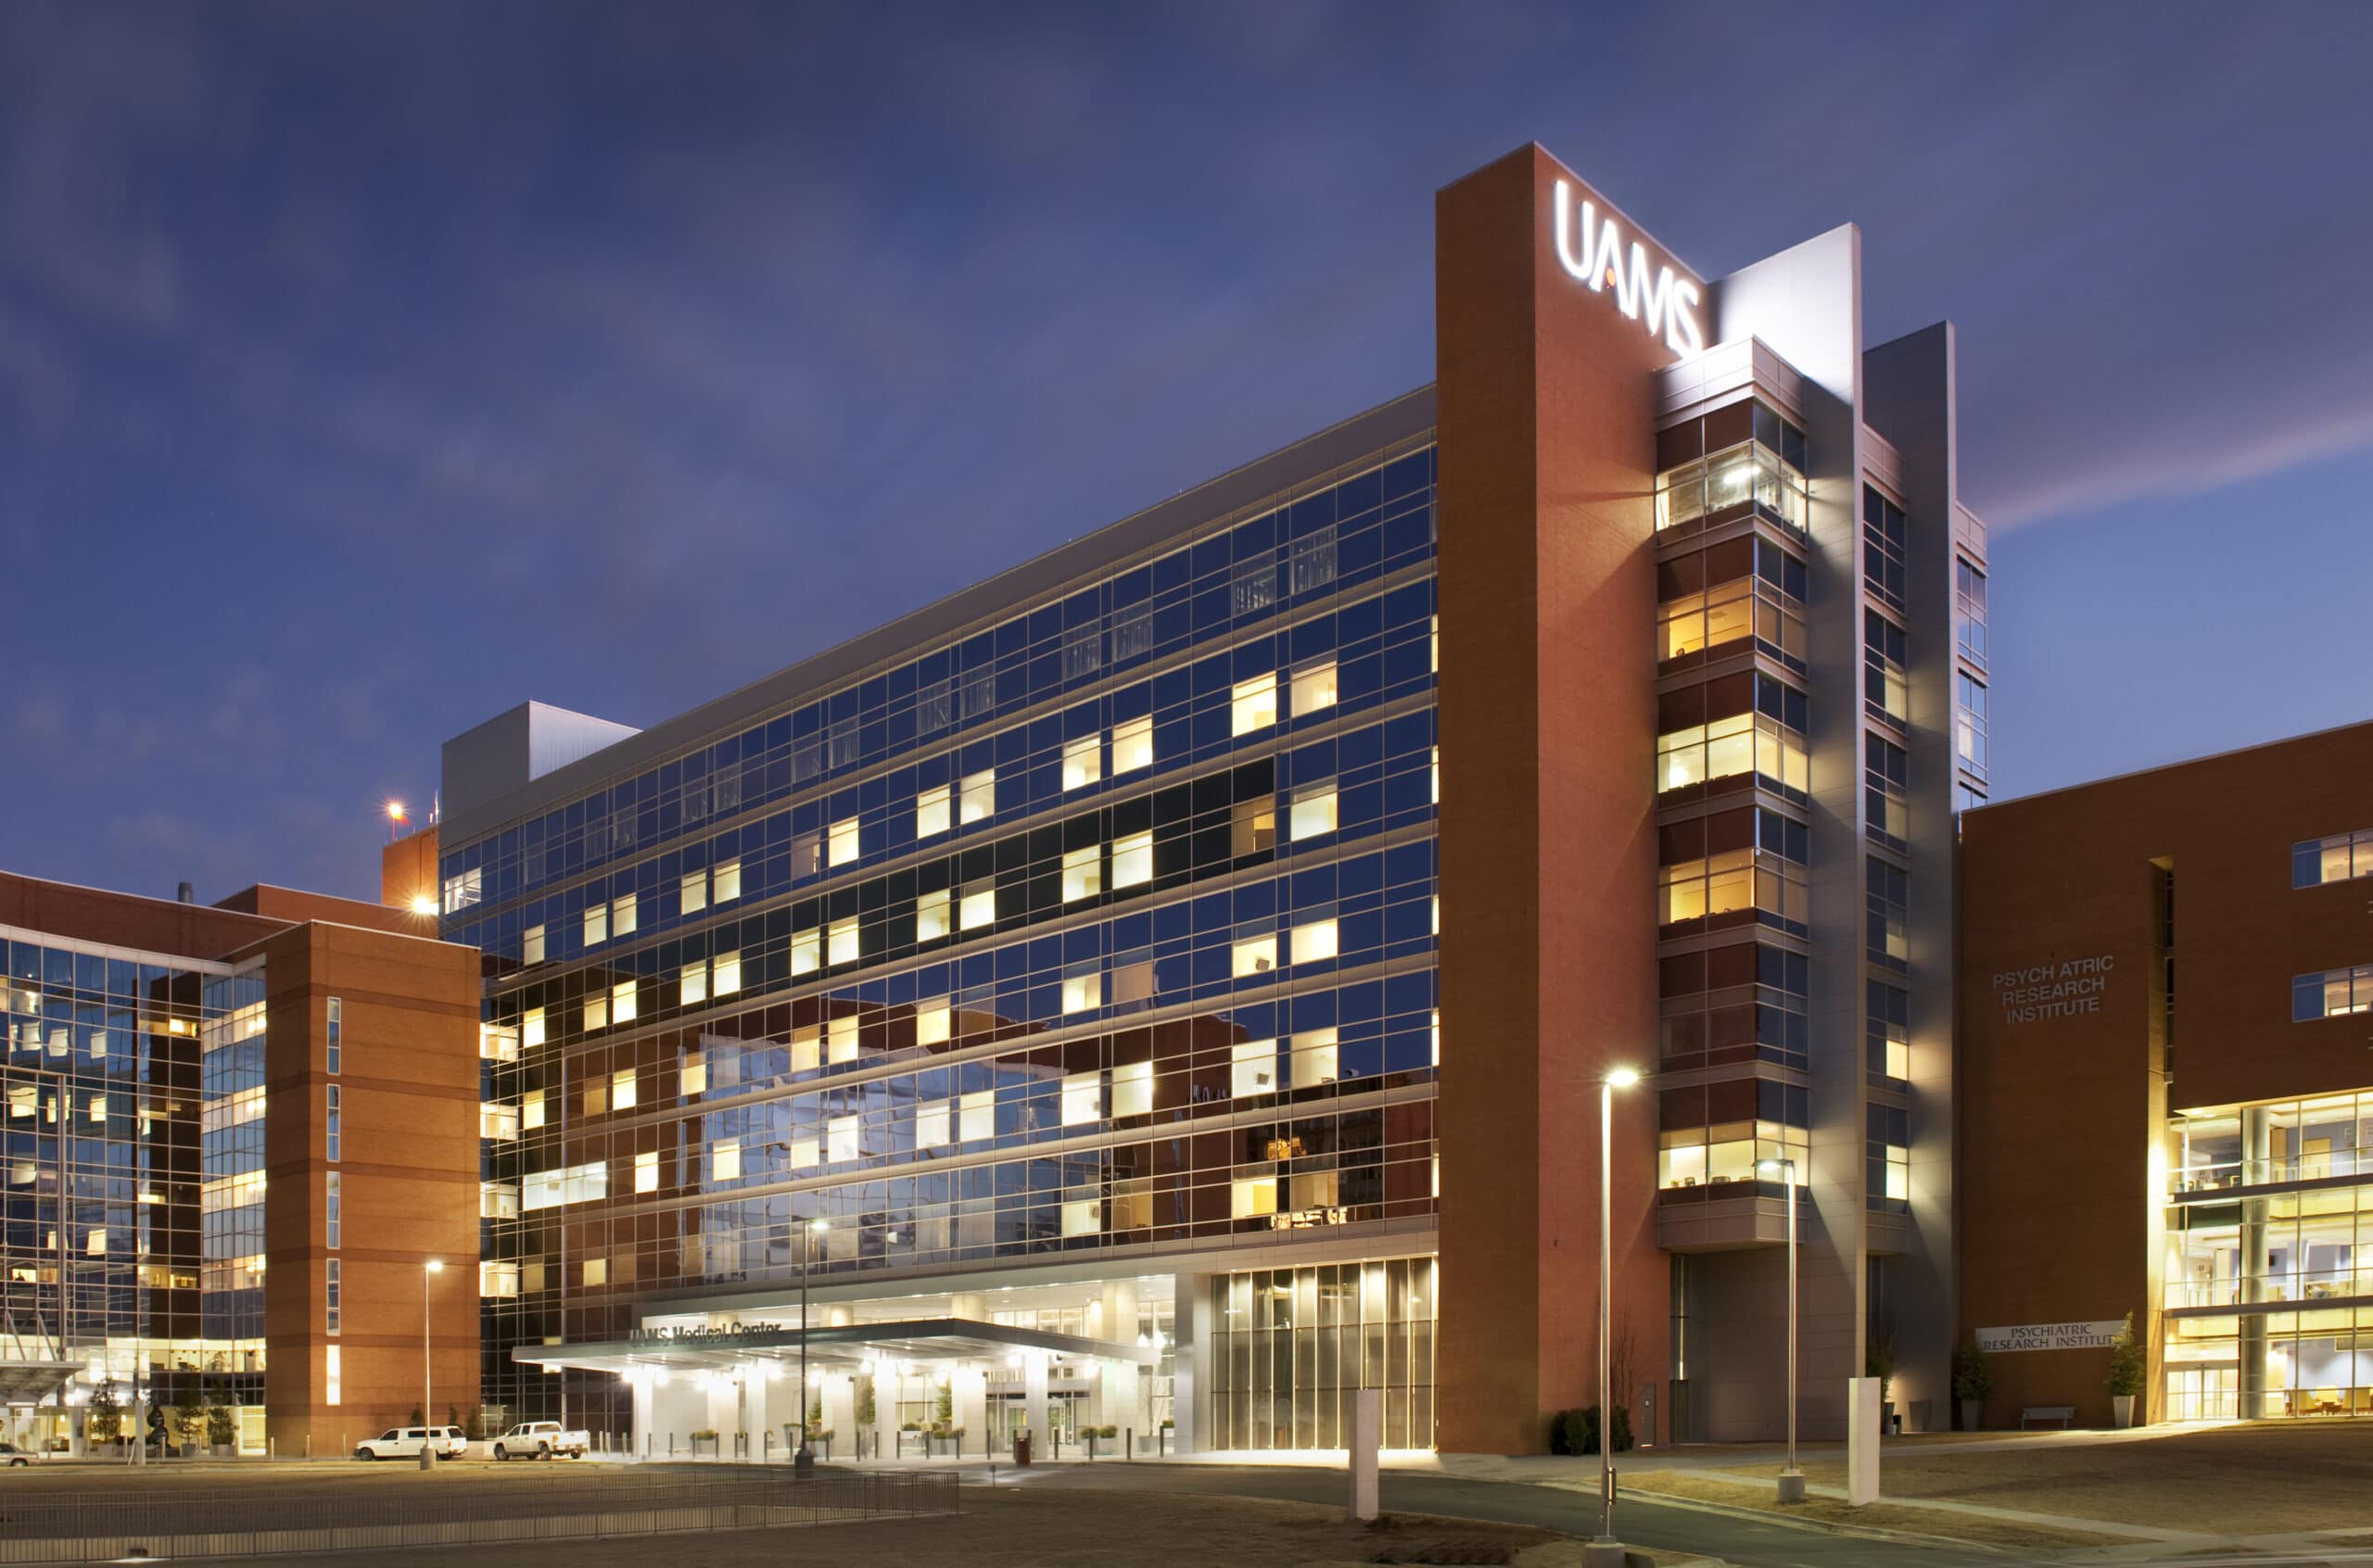 UAMS is partnering with Amedisys and Contessa, to bring a new care at home option to Central Arkansas.